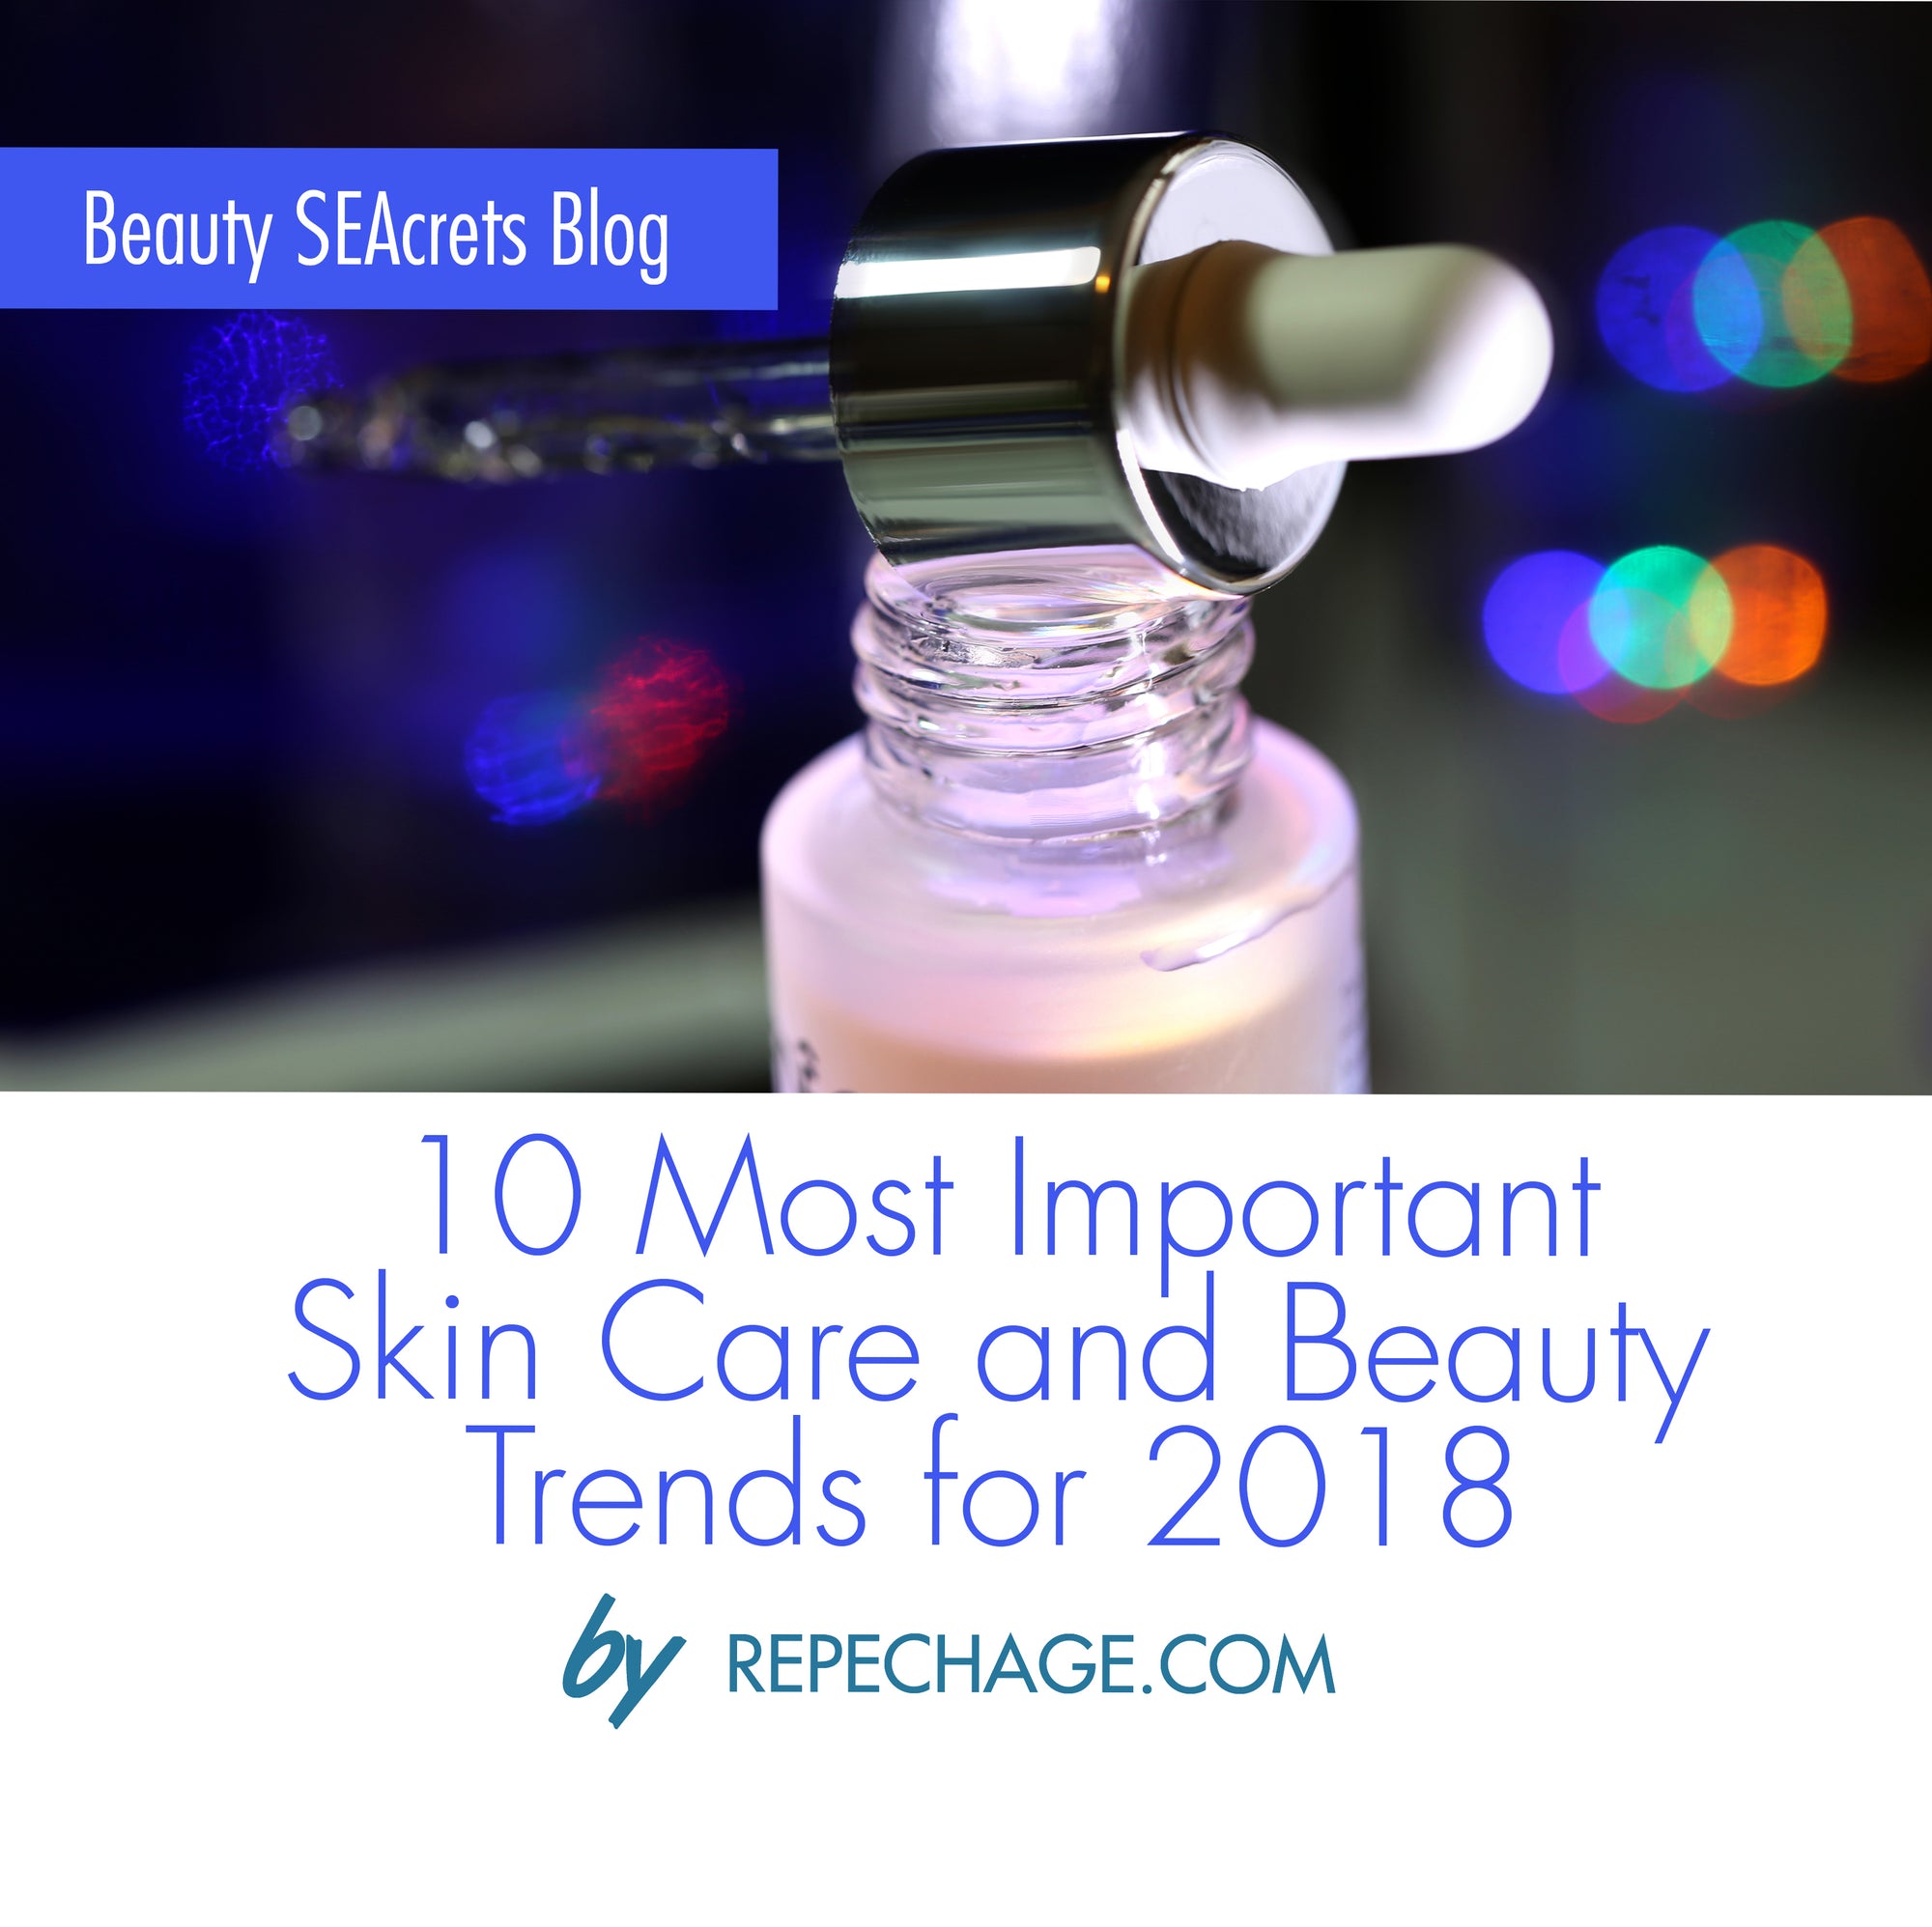 10 Most Important Skin Care and Beauty Trends for 2018